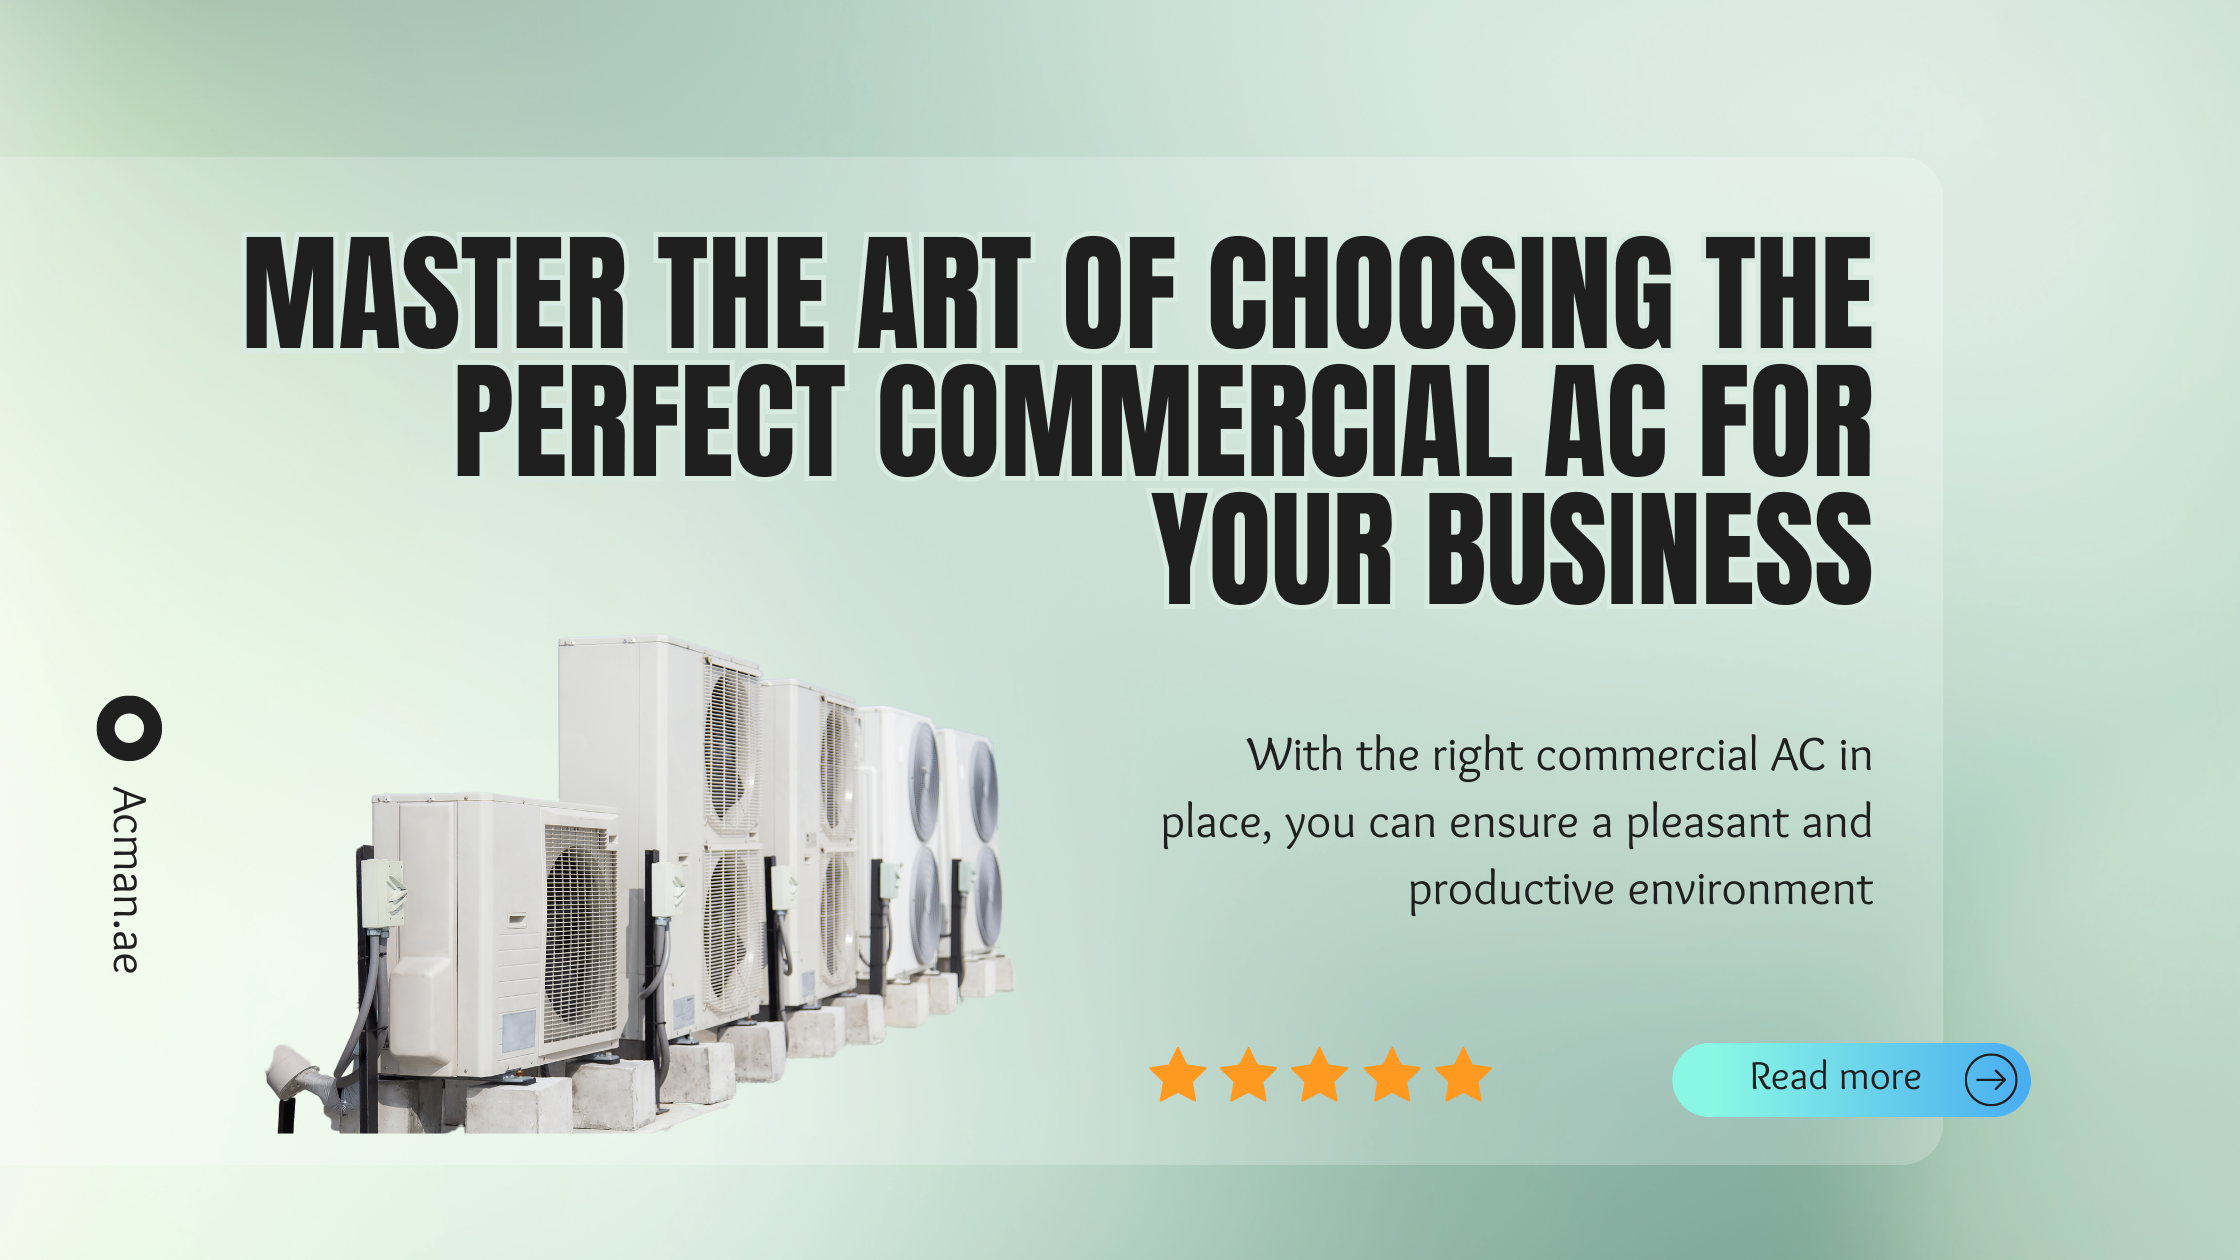 Master the Art of Choosing the Perfect Commercial AC for Your Business